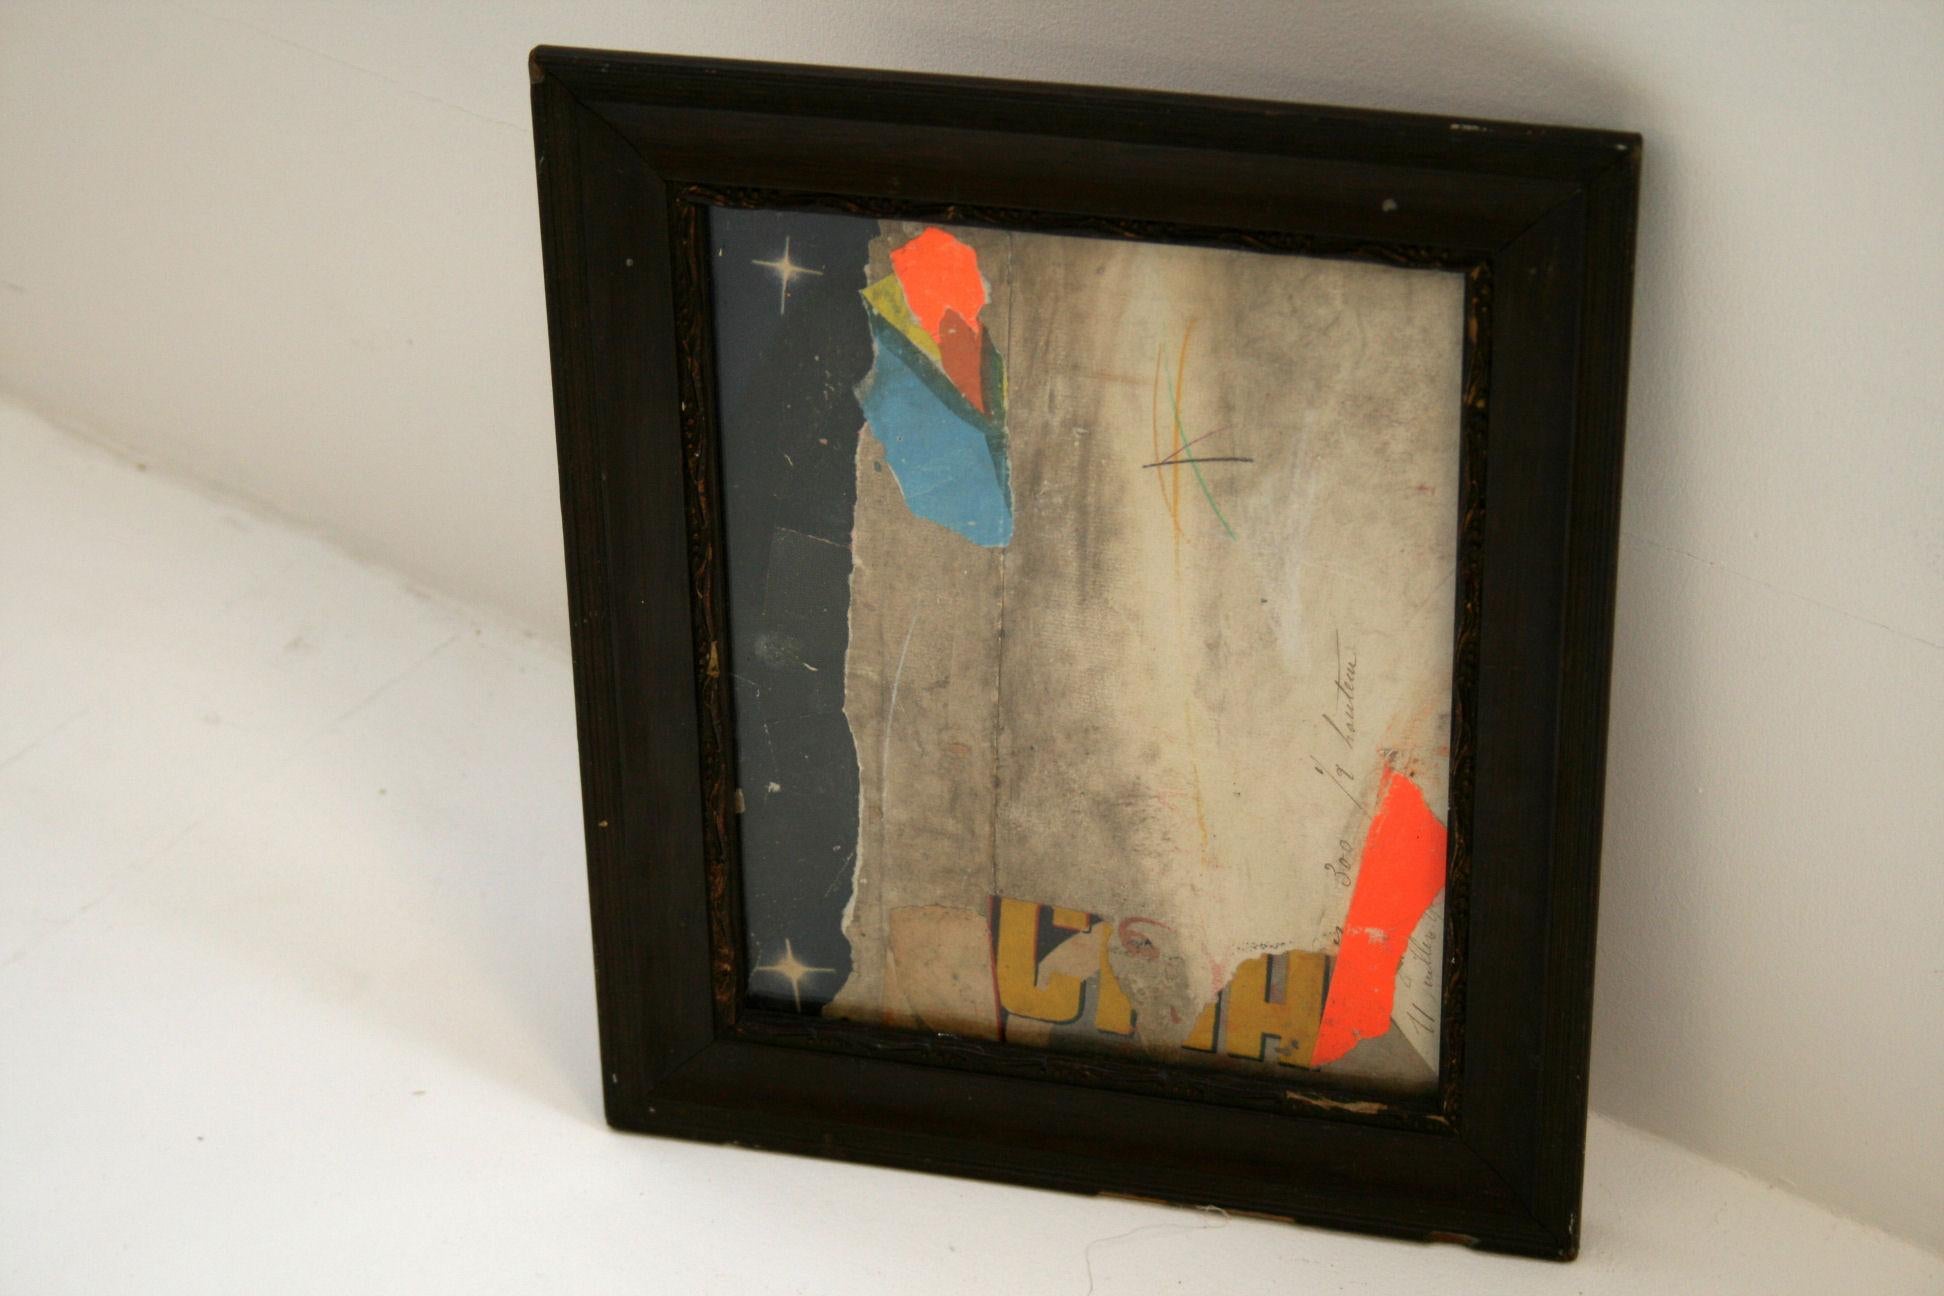 Swansong by Artist Huw Griffith
Collage: 19th century French ephemera, film posters from ‘30s, ‘40s & ‘50s, graphite crayons and household paint.
The collage has been placed into an antique frame which has been reworked by Huw and is part of the